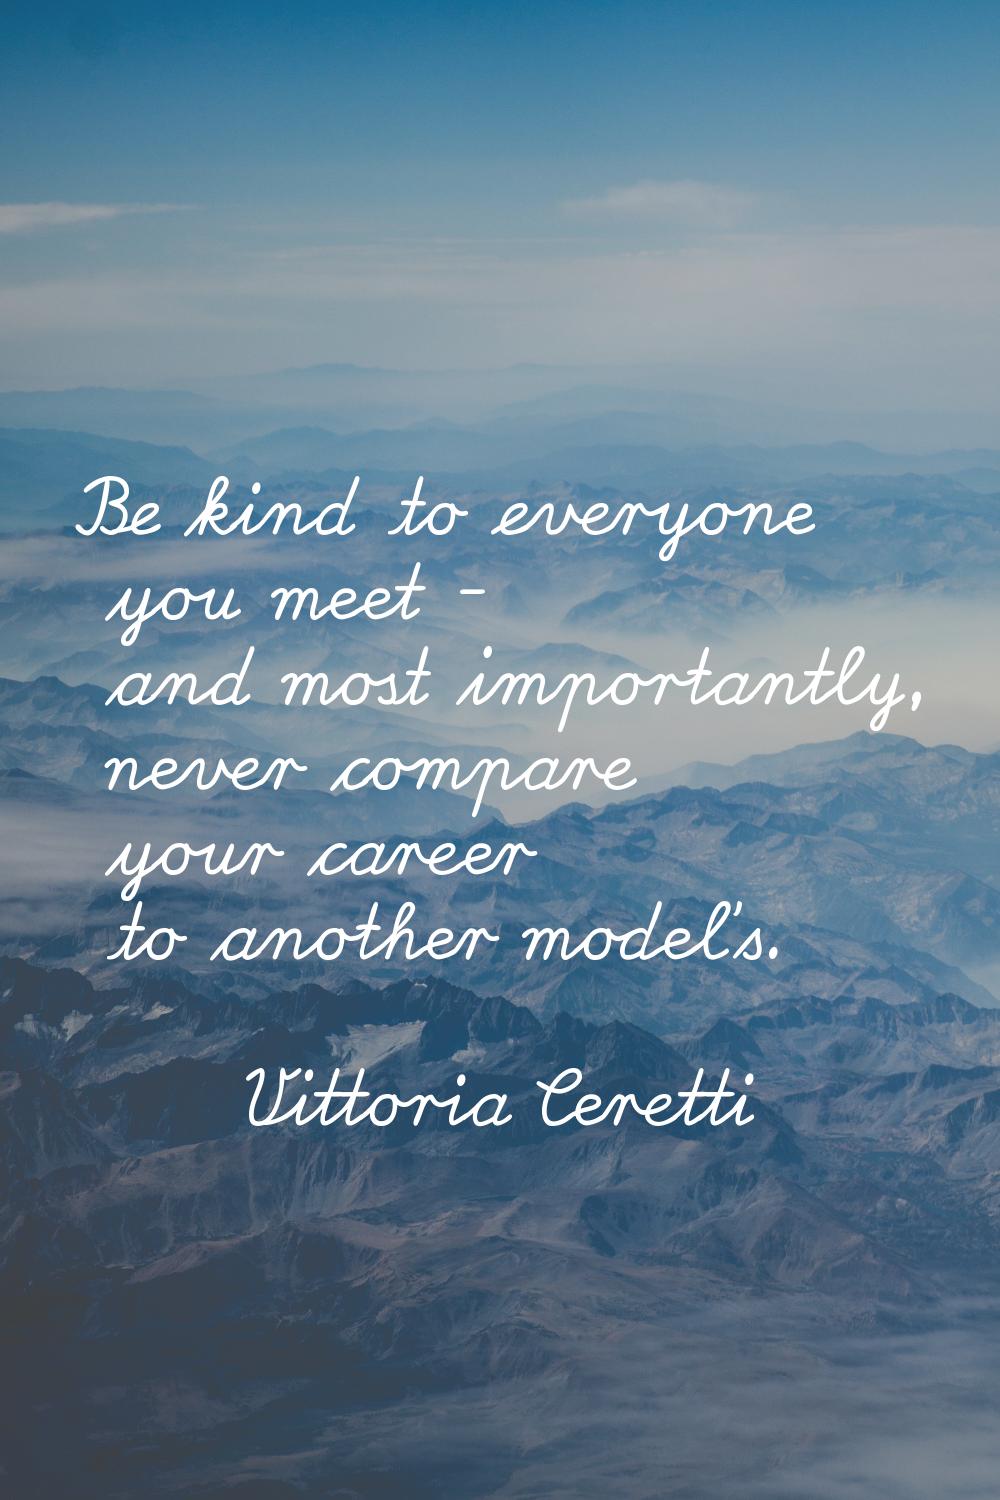 Be kind to everyone you meet - and most importantly, never compare your career to another model's.